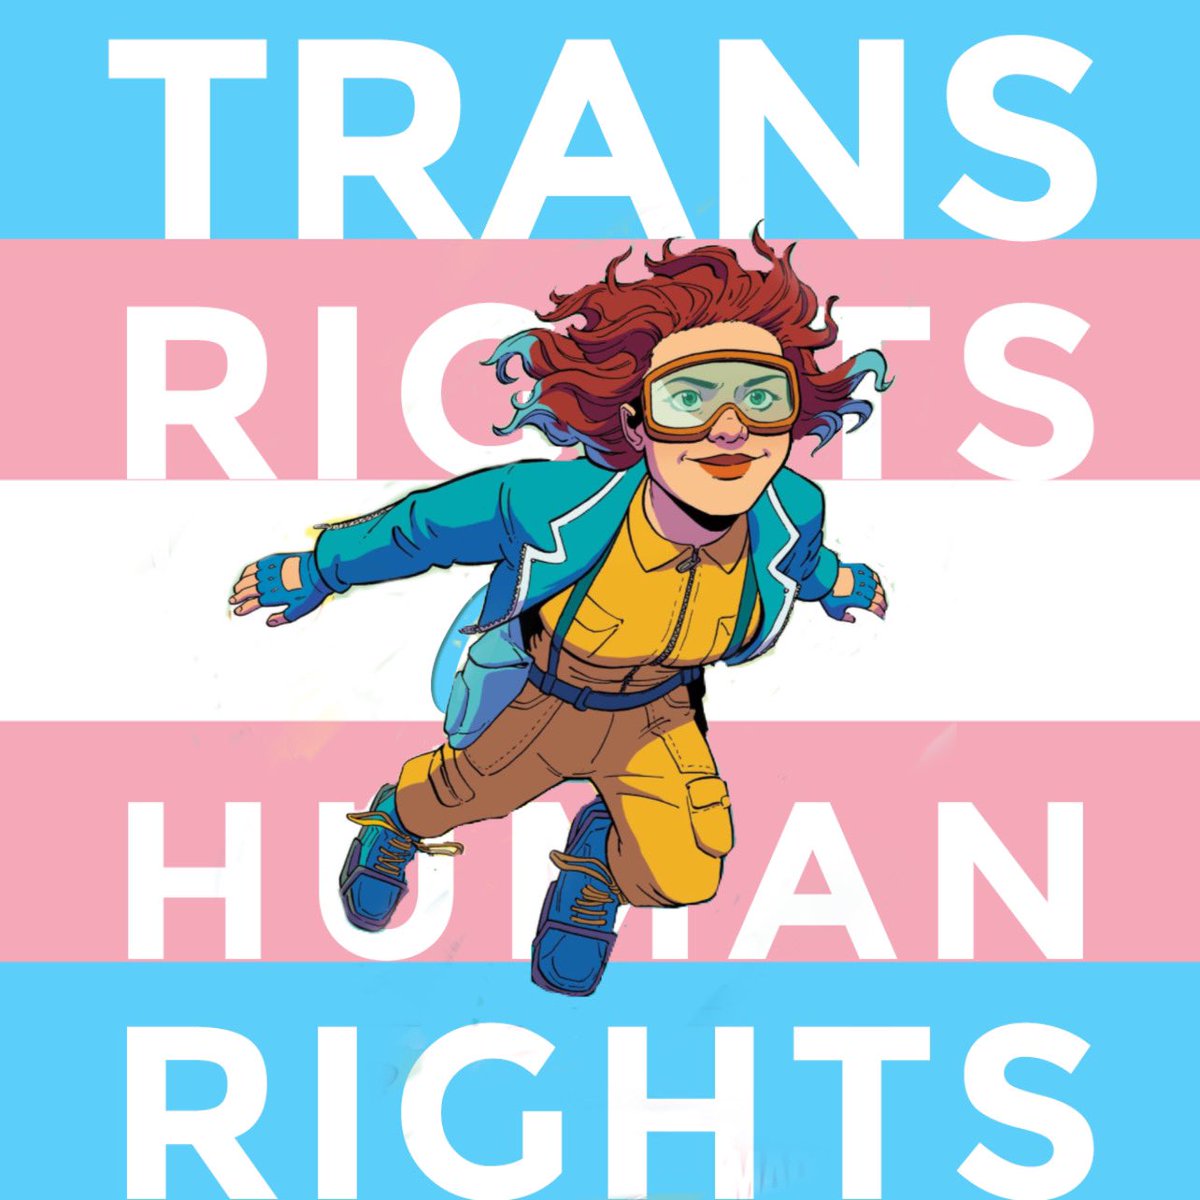 Trans right are human rights #TransRights  #TransRightsAreHumanRights  #TransRightsMatter  #LGBTQ  #LGBTQIA  #Marvelcomics #Xtwitter